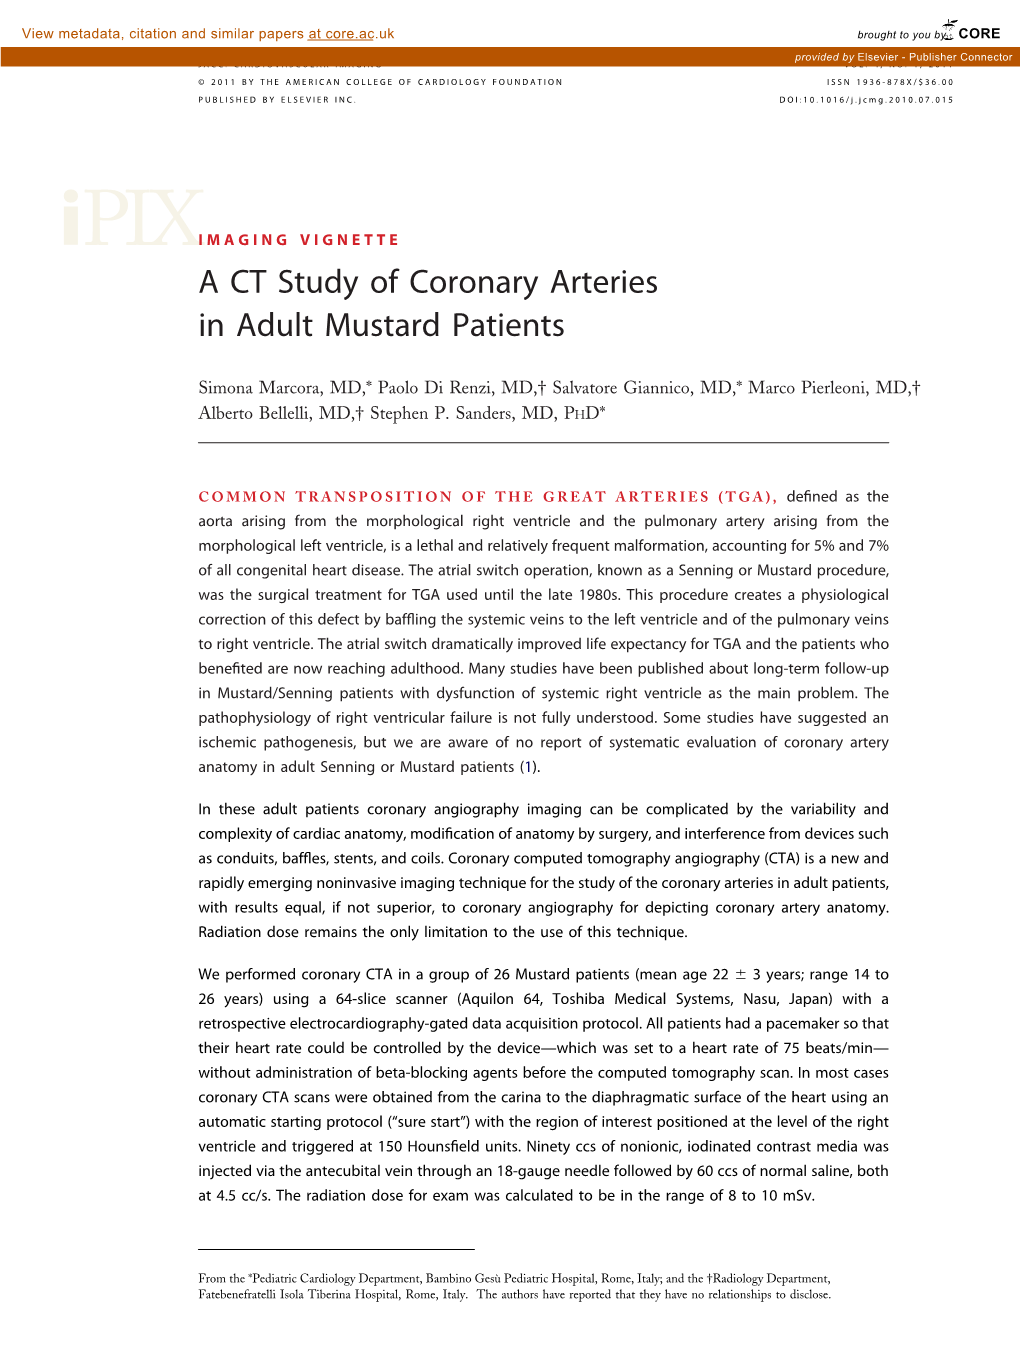 A CT Study of Coronary Arteries in Adult Mustard Patients